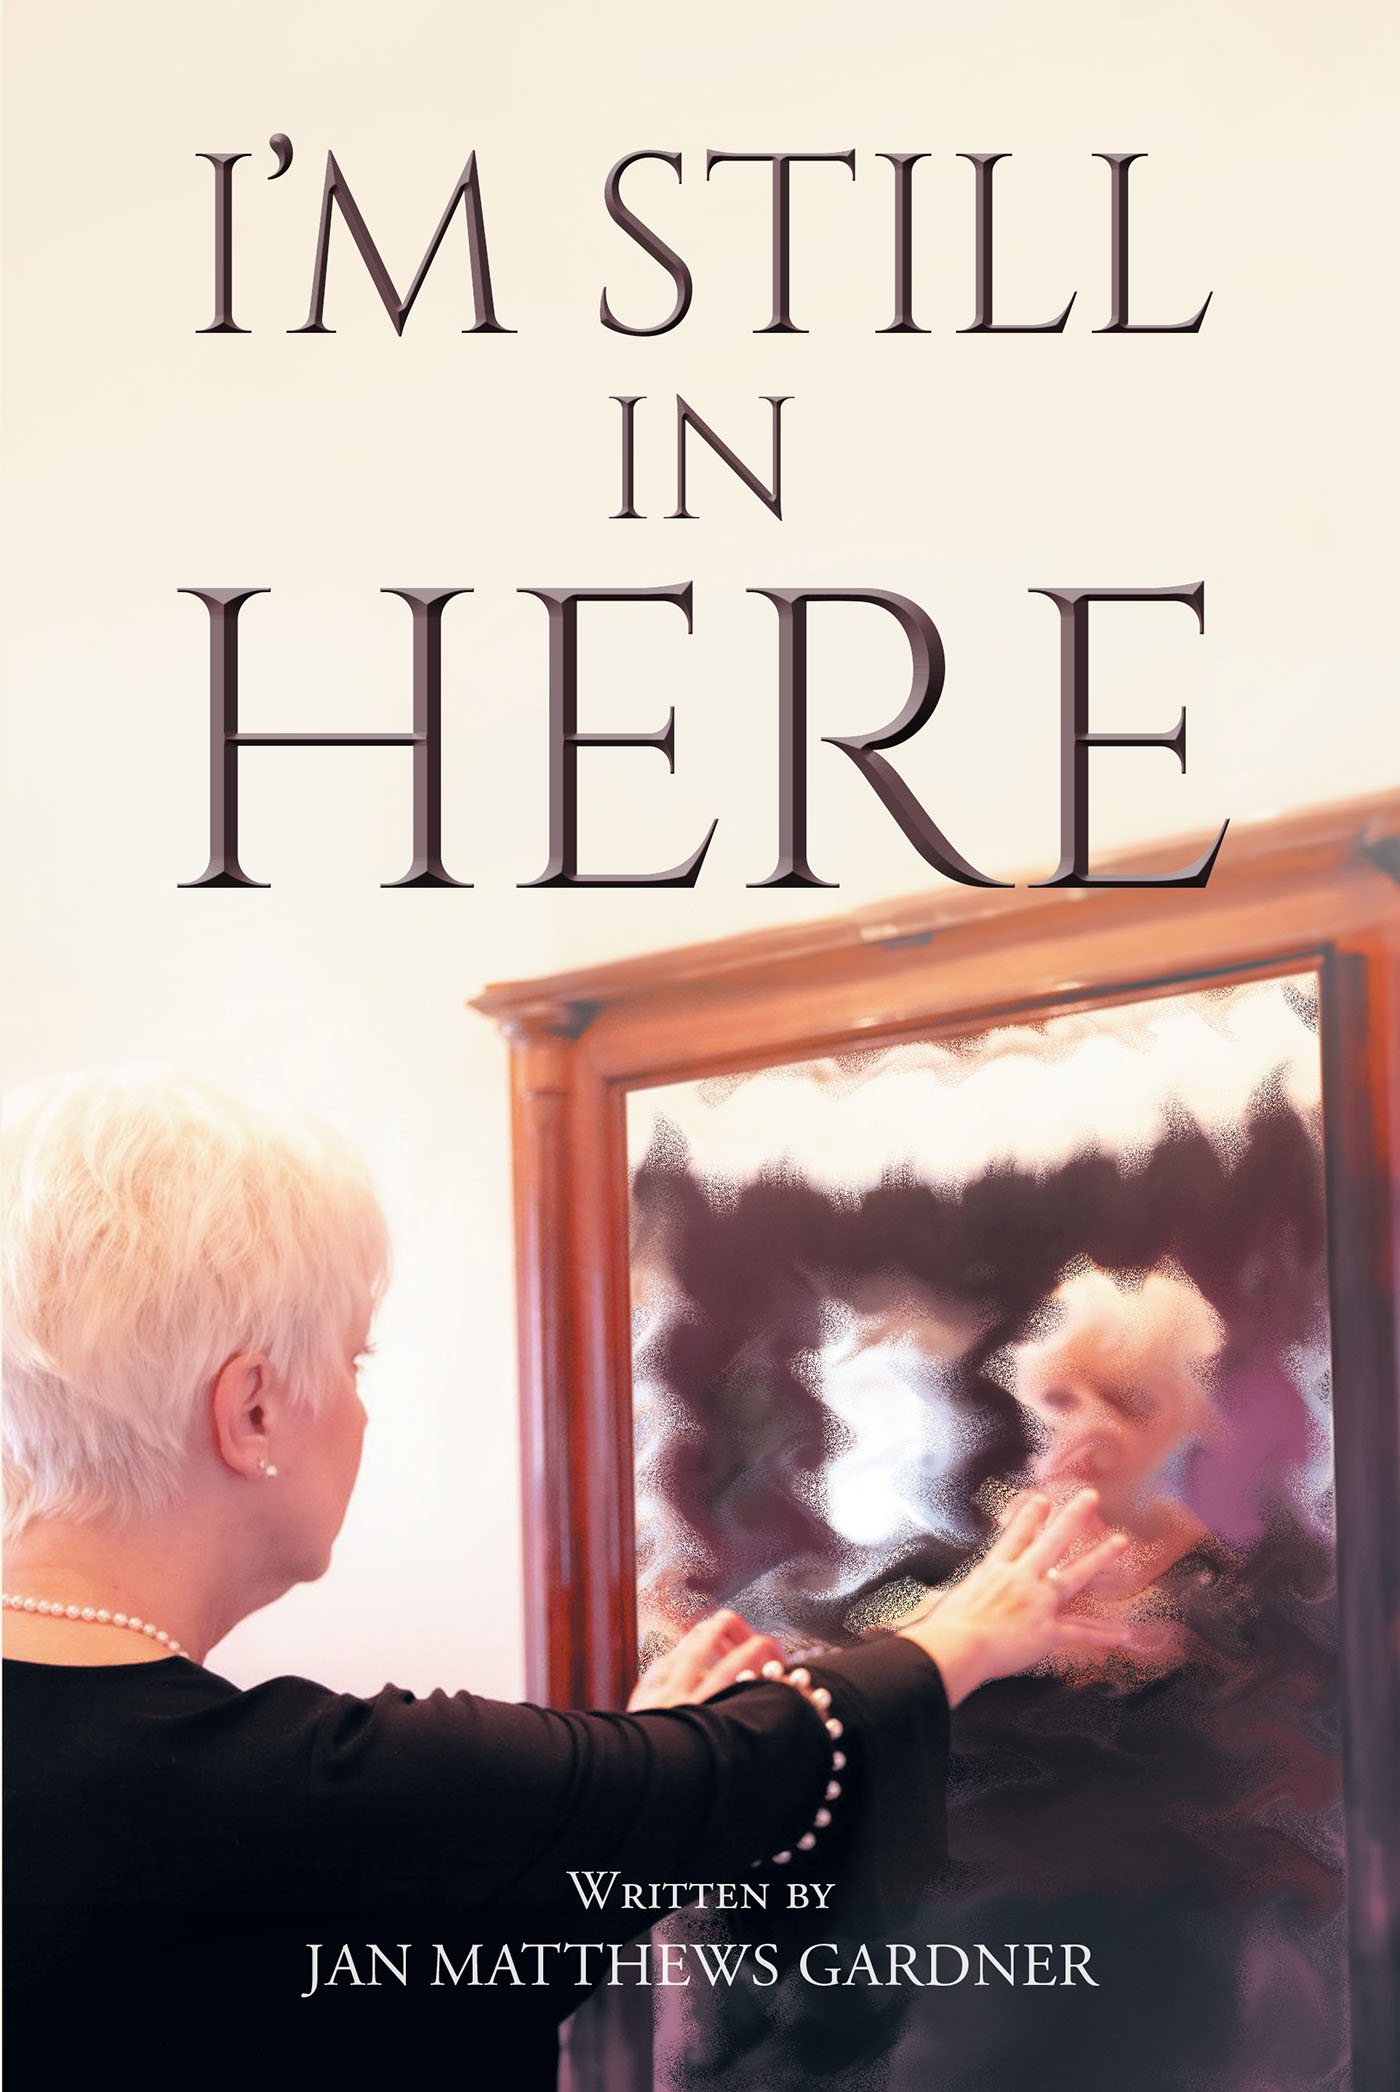 Author Jan Matthews Gardner’s New Book, "I'm Still In Here," Reveals How the Lord Provided Strength to the Author Following a Life-Changing Brain Injury